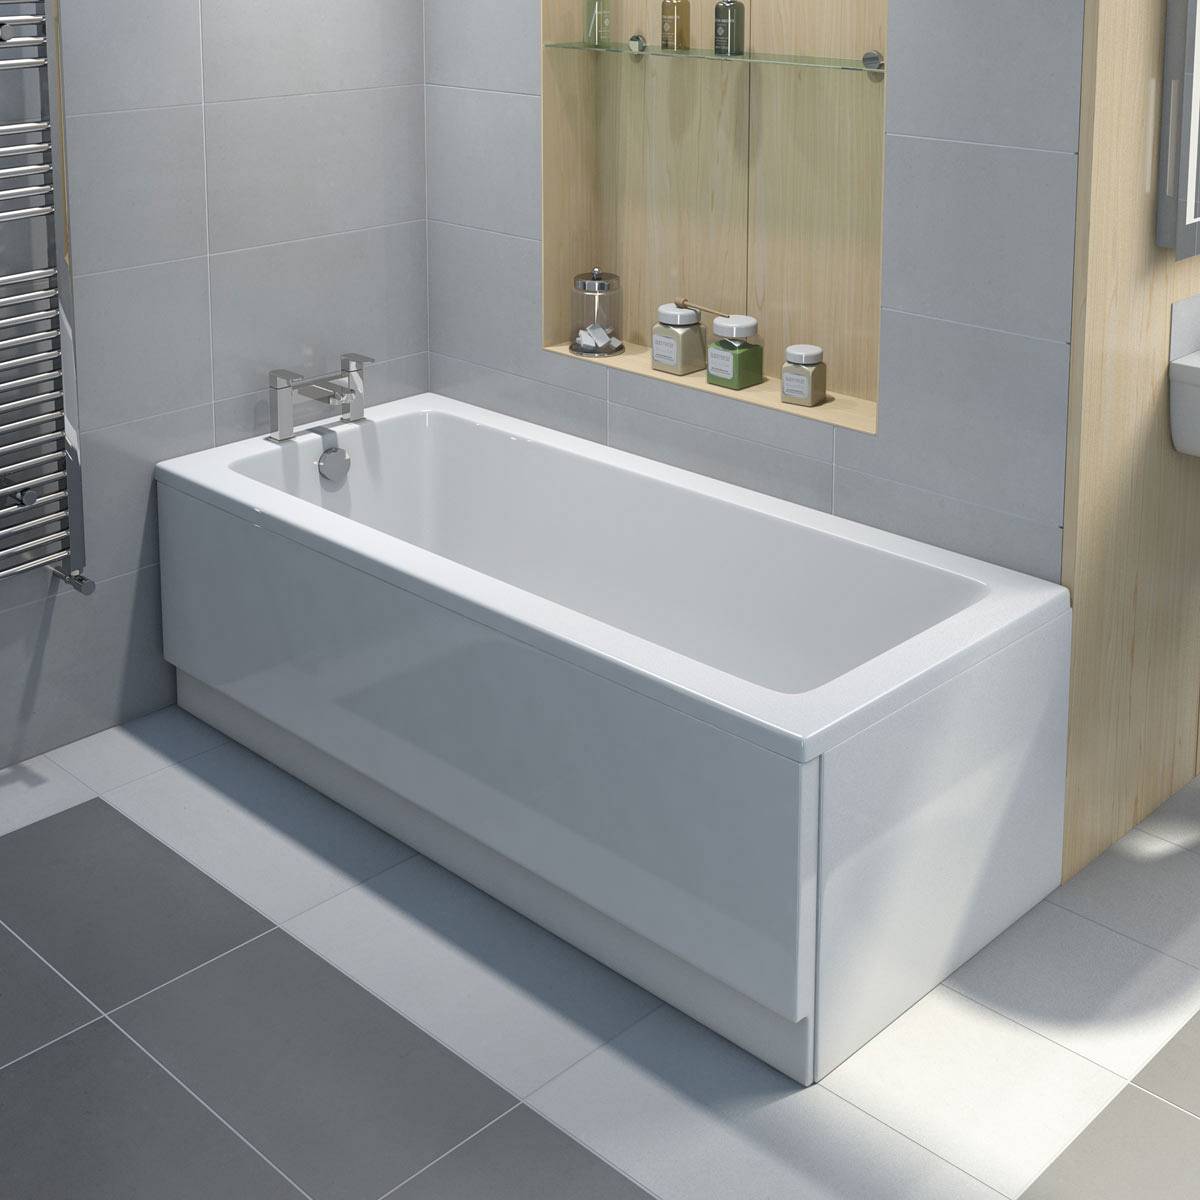 Guide to Fitting Bathroom Panels